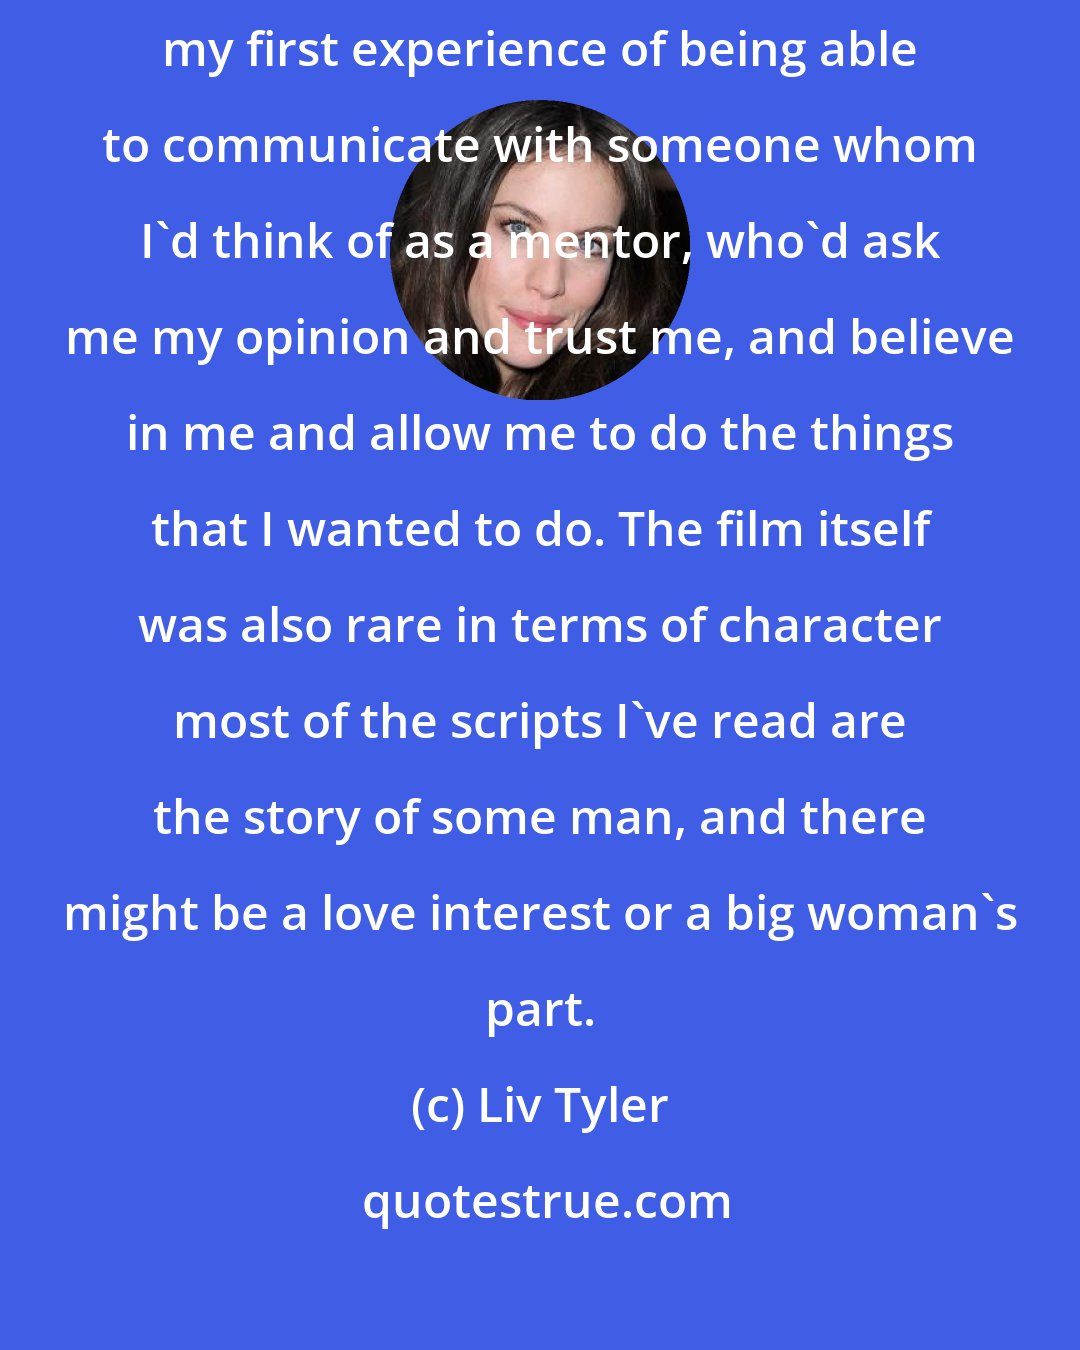 Liv Tyler: Working with Bernardo Bertolucci, director of Stealing Beauty was my first experience of being able to communicate with someone whom I'd think of as a mentor, who'd ask me my opinion and trust me, and believe in me and allow me to do the things that I wanted to do. The film itself was also rare in terms of character most of the scripts I've read are the story of some man, and there might be a love interest or a big woman's part.